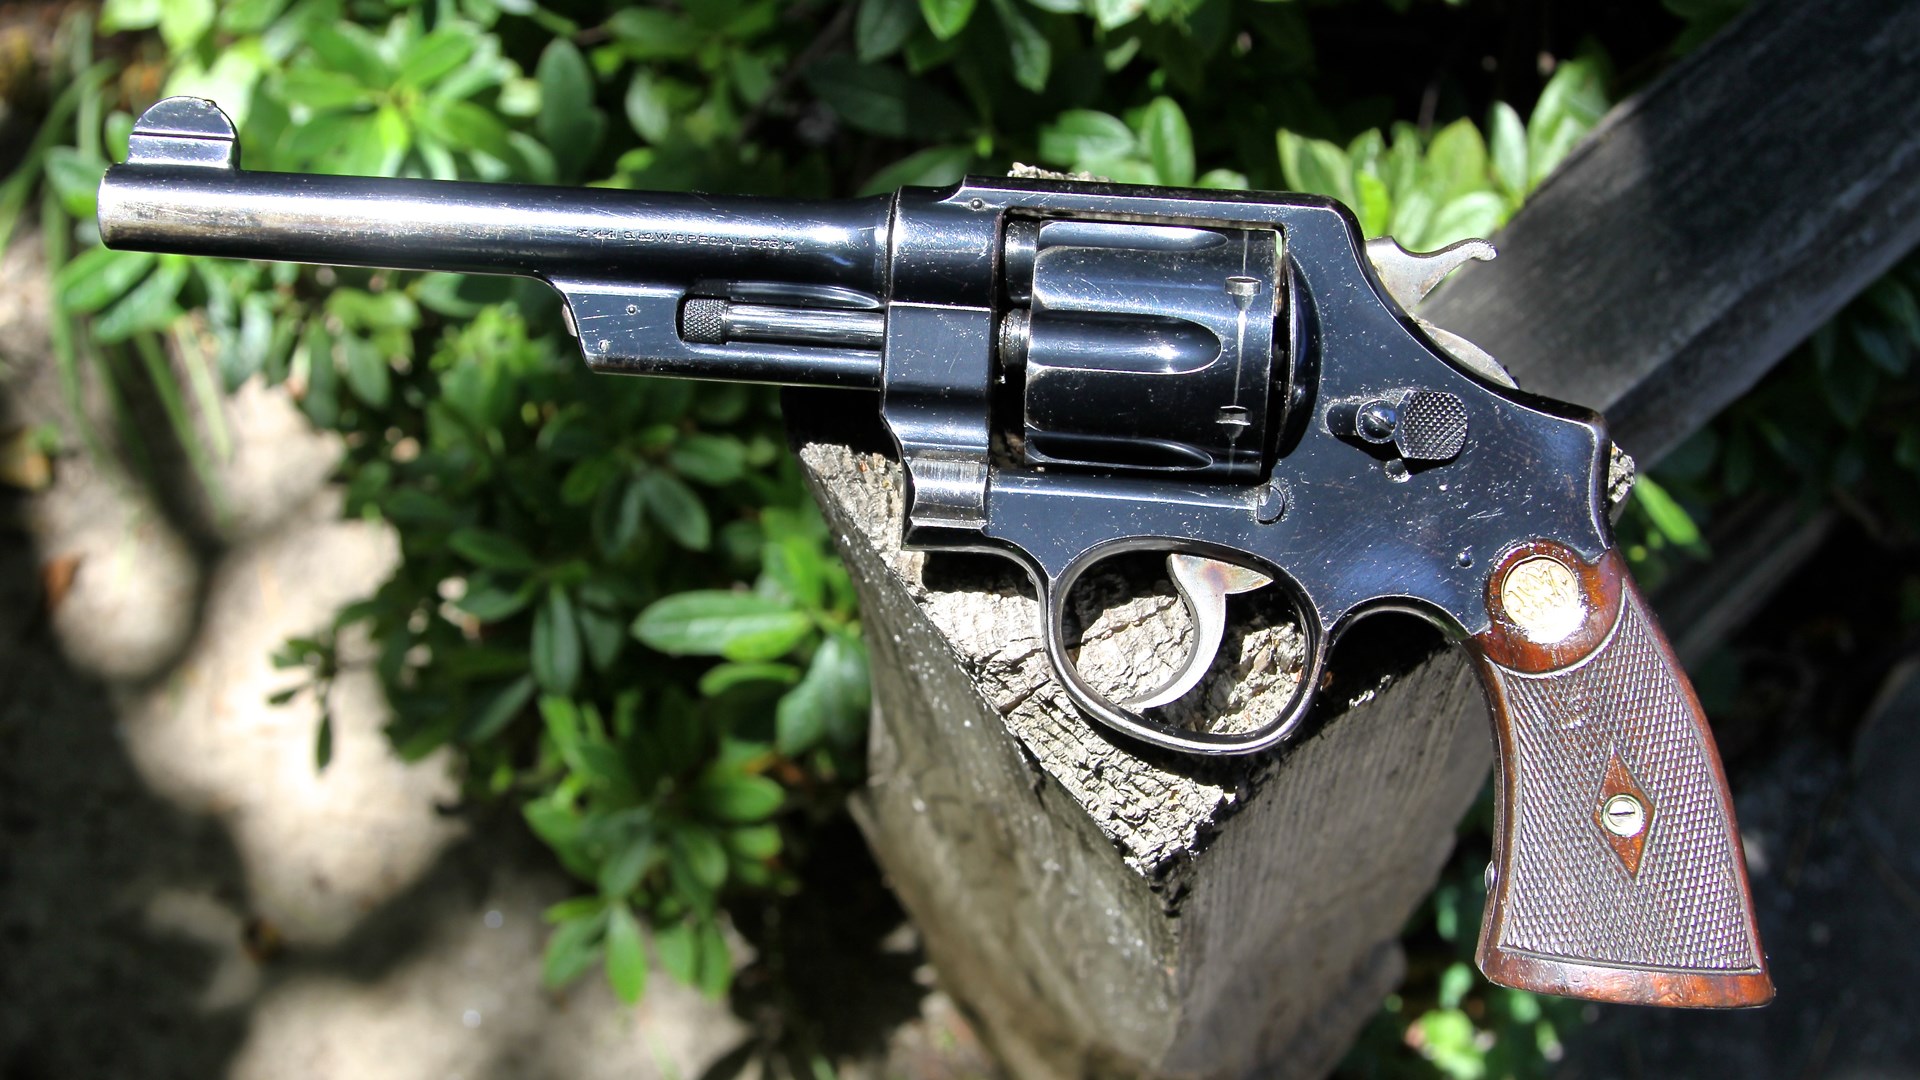 Smith & Wesson triple lock revolver outdoors left-side view The Smith & Wesson Triple Lock is thought by many to be the epitome of what a modern double-action should look like – even though it first came out in 1908 and started the S&W .44 Hand Ejector trilogy, which lasted until World War II. This particular Triple Lock was one of the last produced and was shipped to businessman J.F. Darling on Sept. 11, 1915.